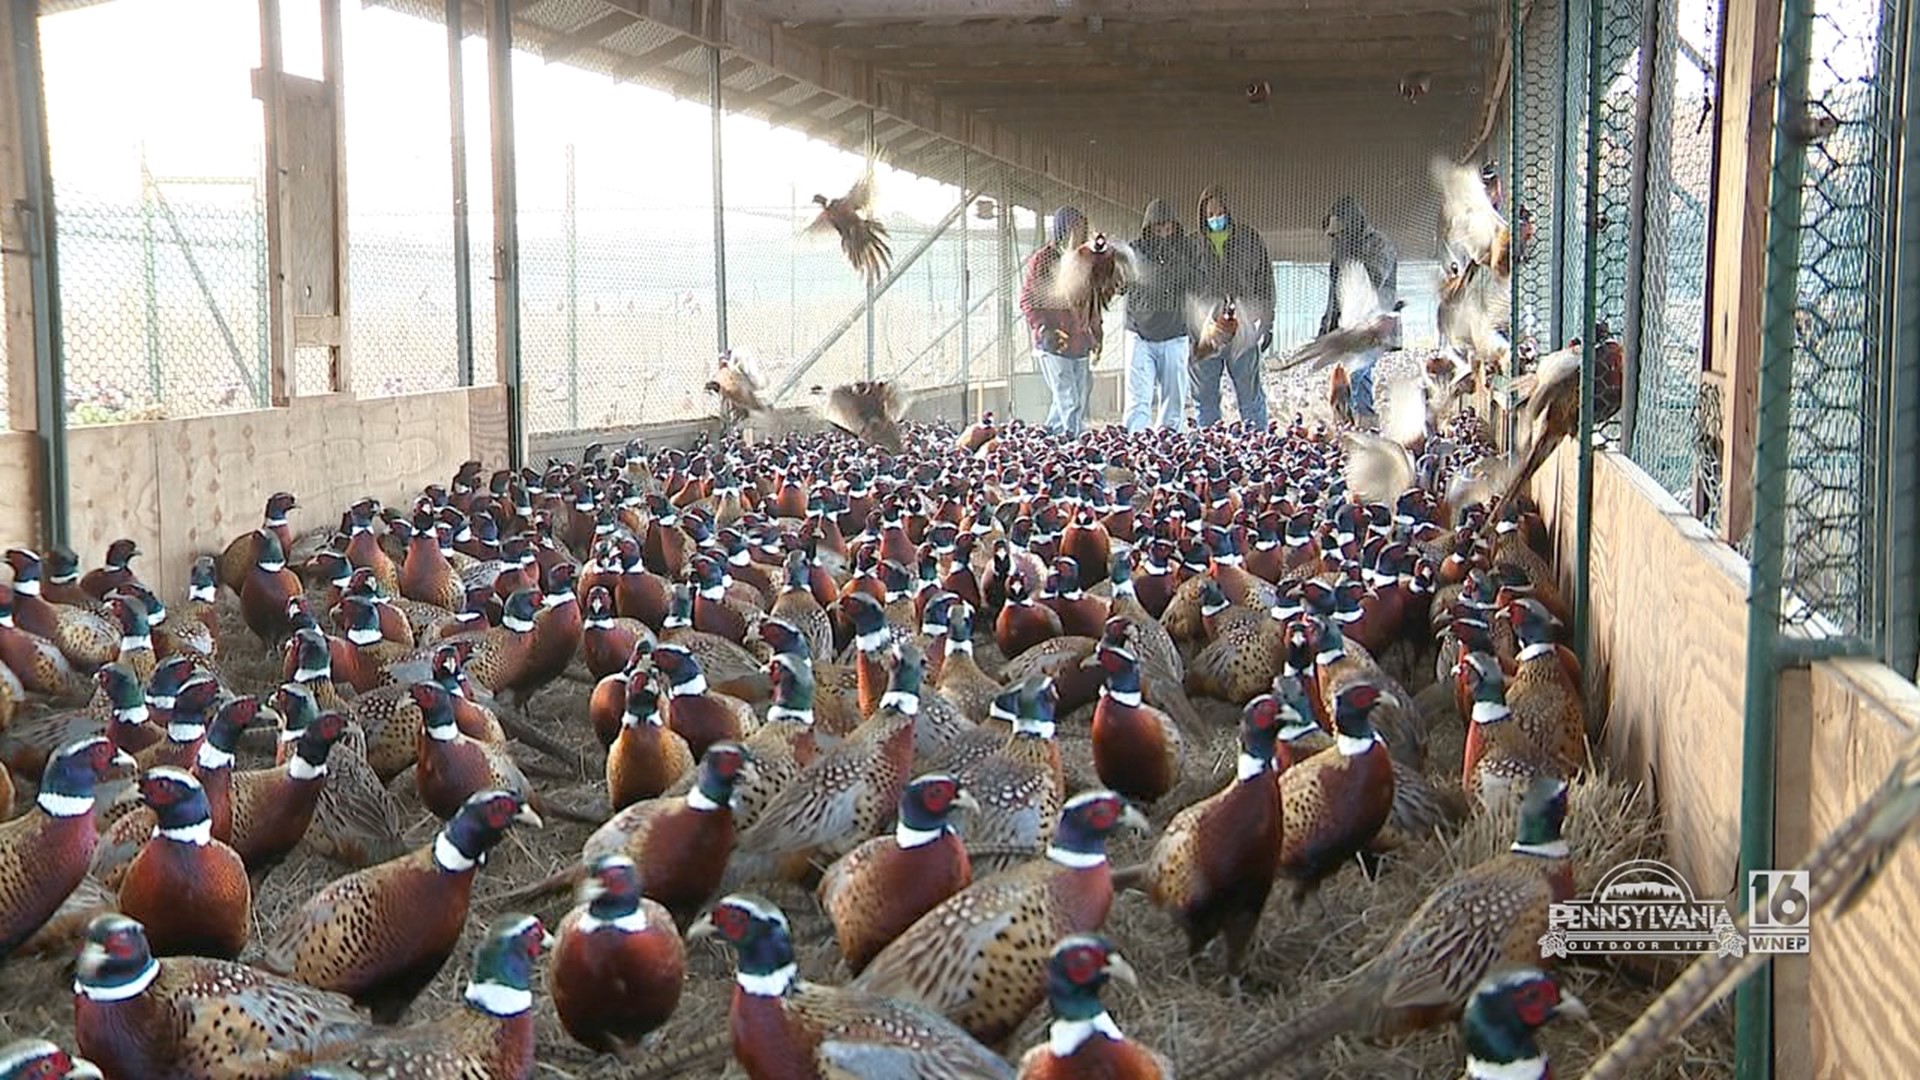 Ringnecks as far as the eye can see.